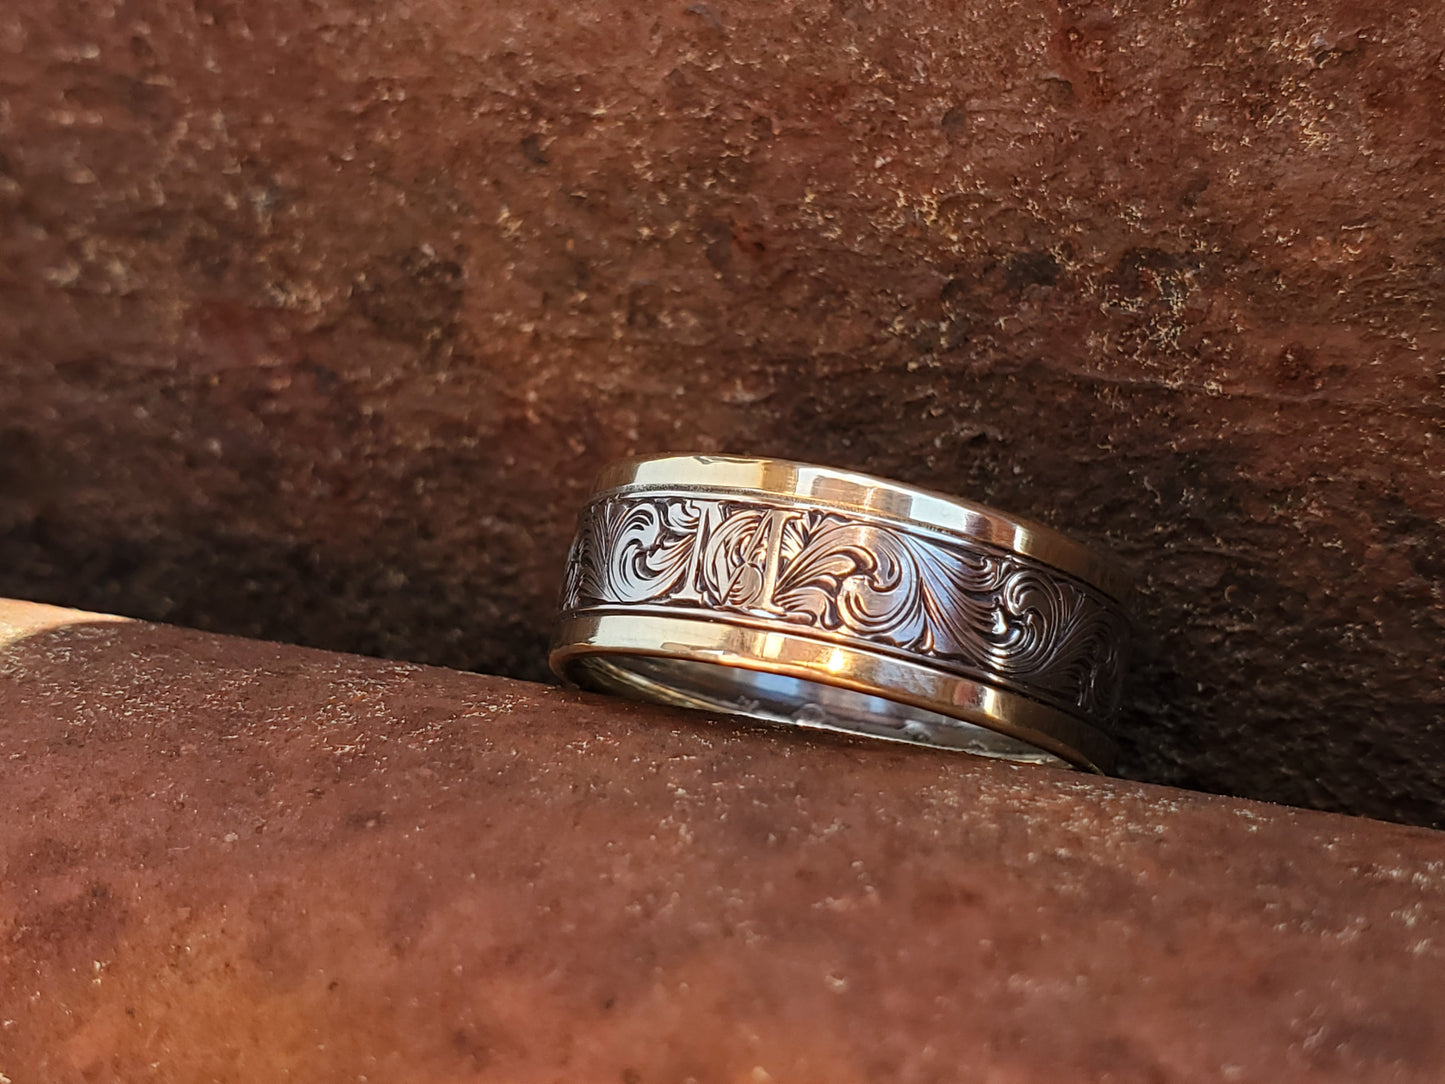 The Milo: 10K White and Yellow Gold Men's Western Wedding Band, Custom Engraved Initial, Hand-Engraved Cowboy Wedding Ring, Men's Engraved Wedding Band, 10mm Wedding Band for Men, Two-tone Men's Ring